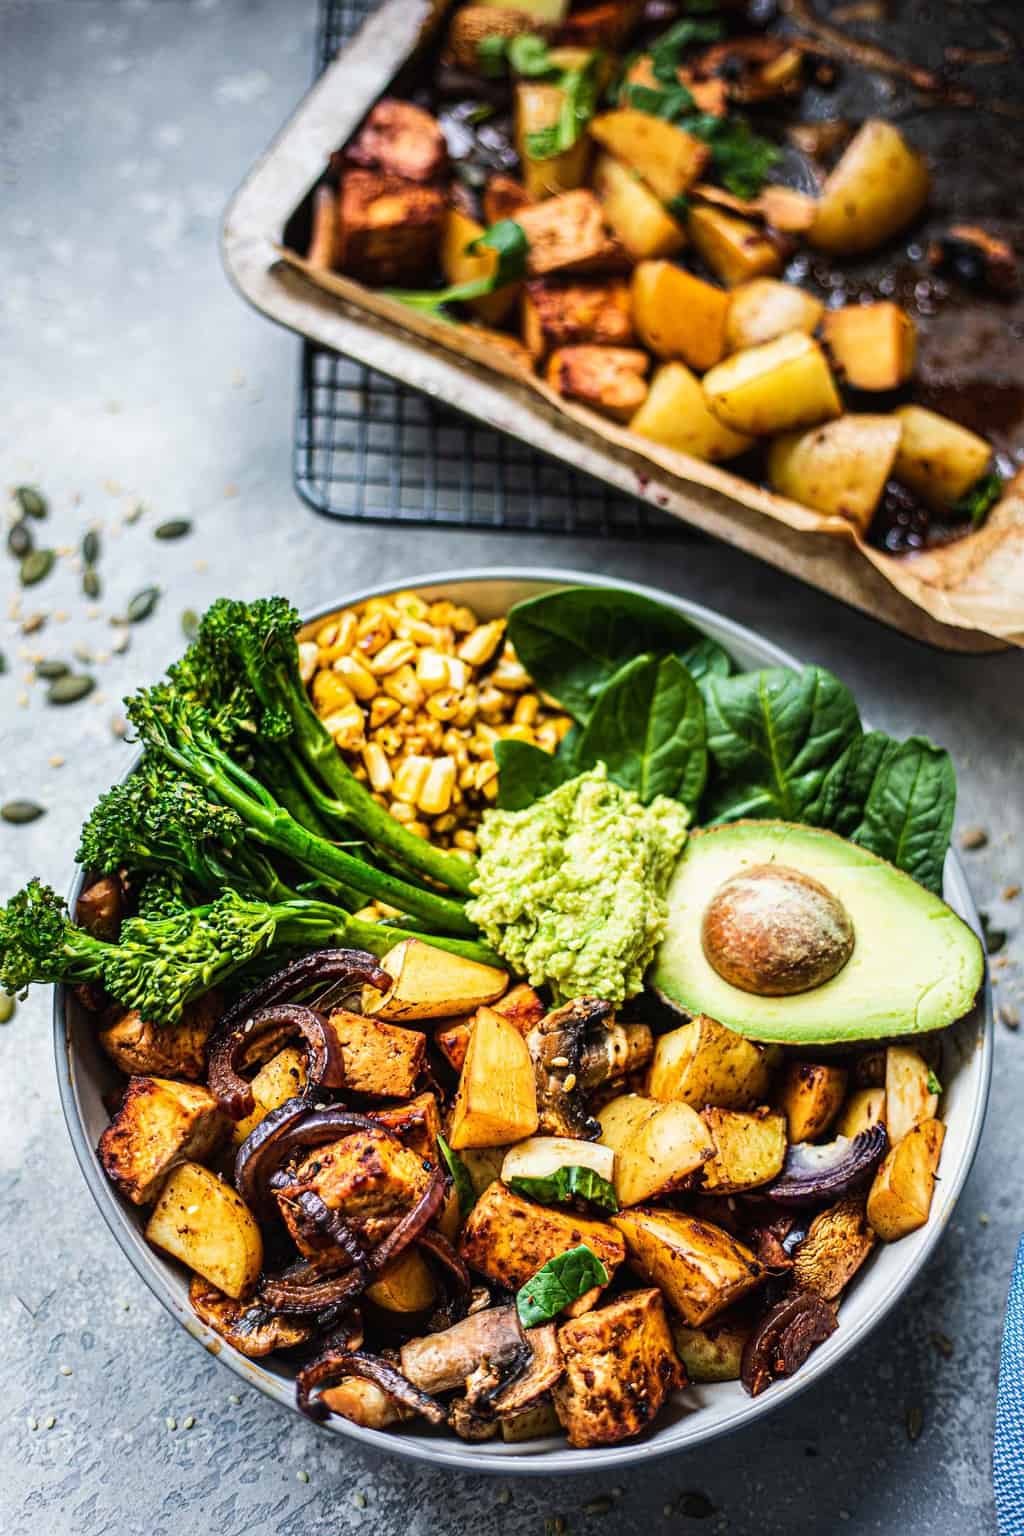 Bowl with potatoes, tofu and vegetables